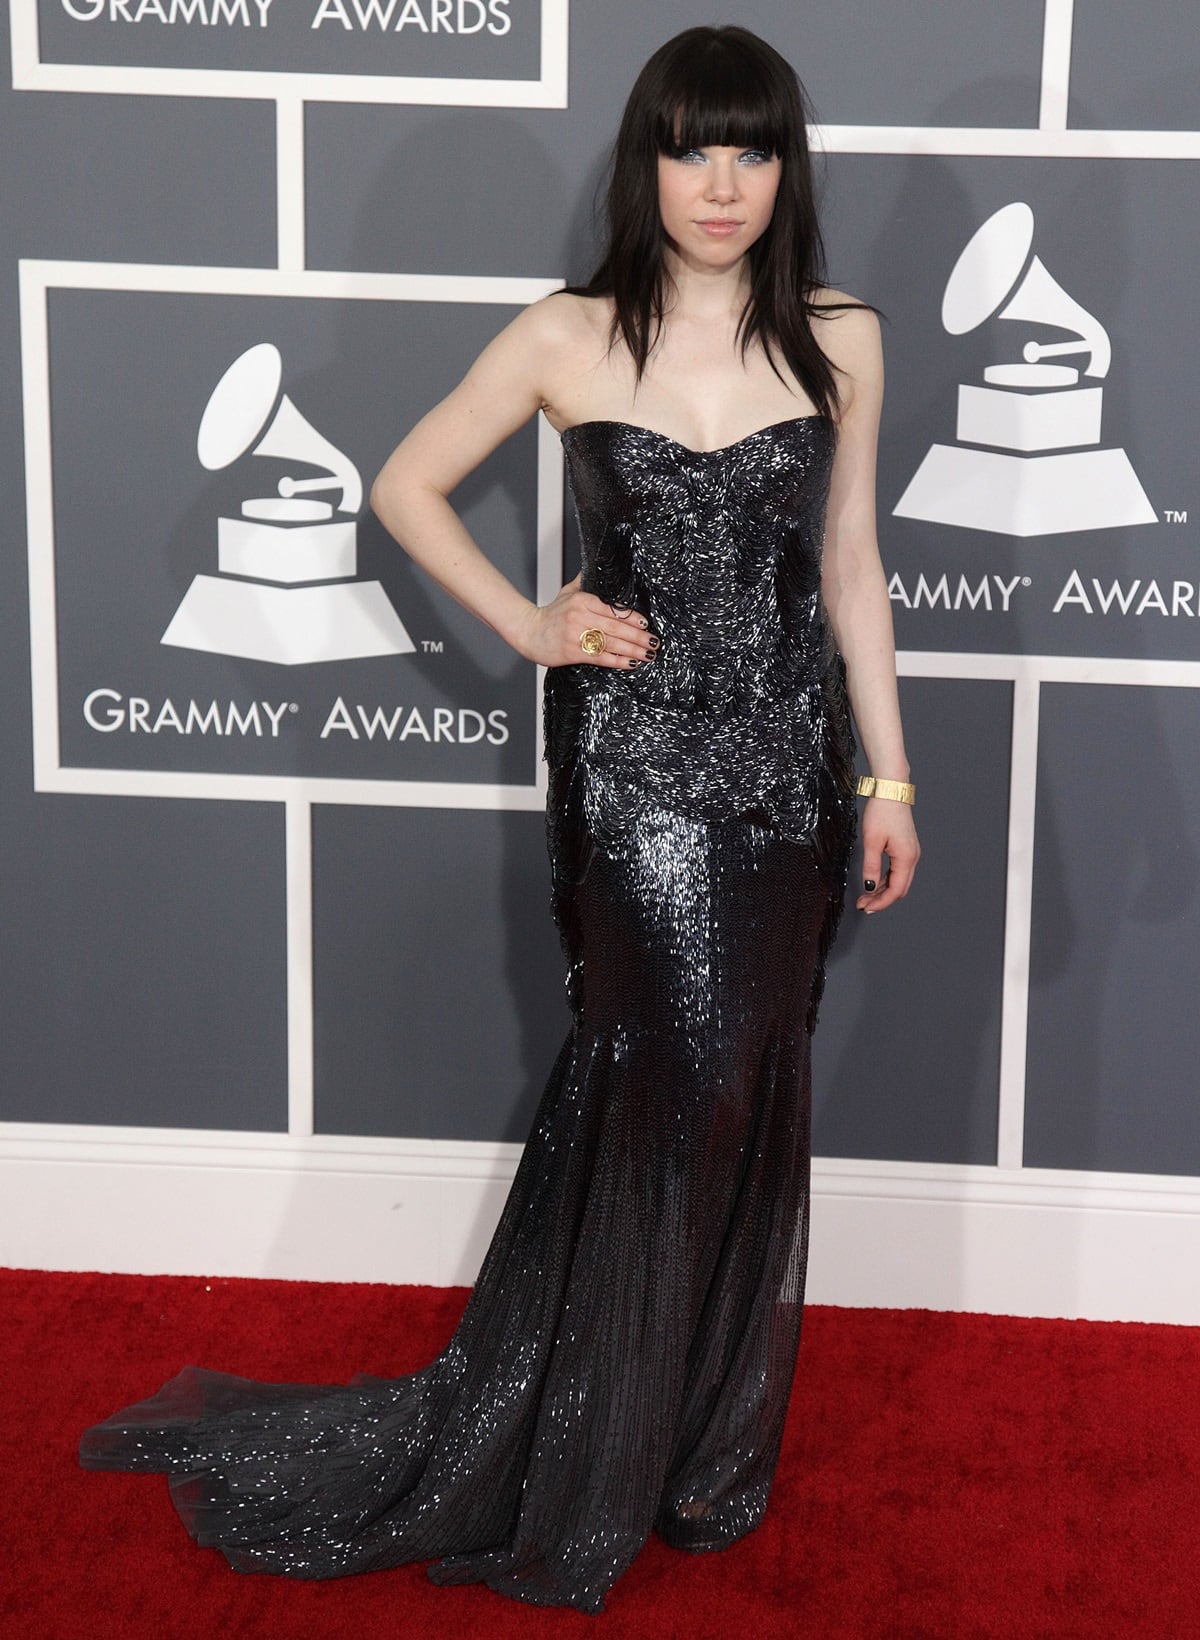 Carly Rae Jepsen stunned in a gunmetal gray Roberto Cavalli dress at the 55th Annual Grammy Awards